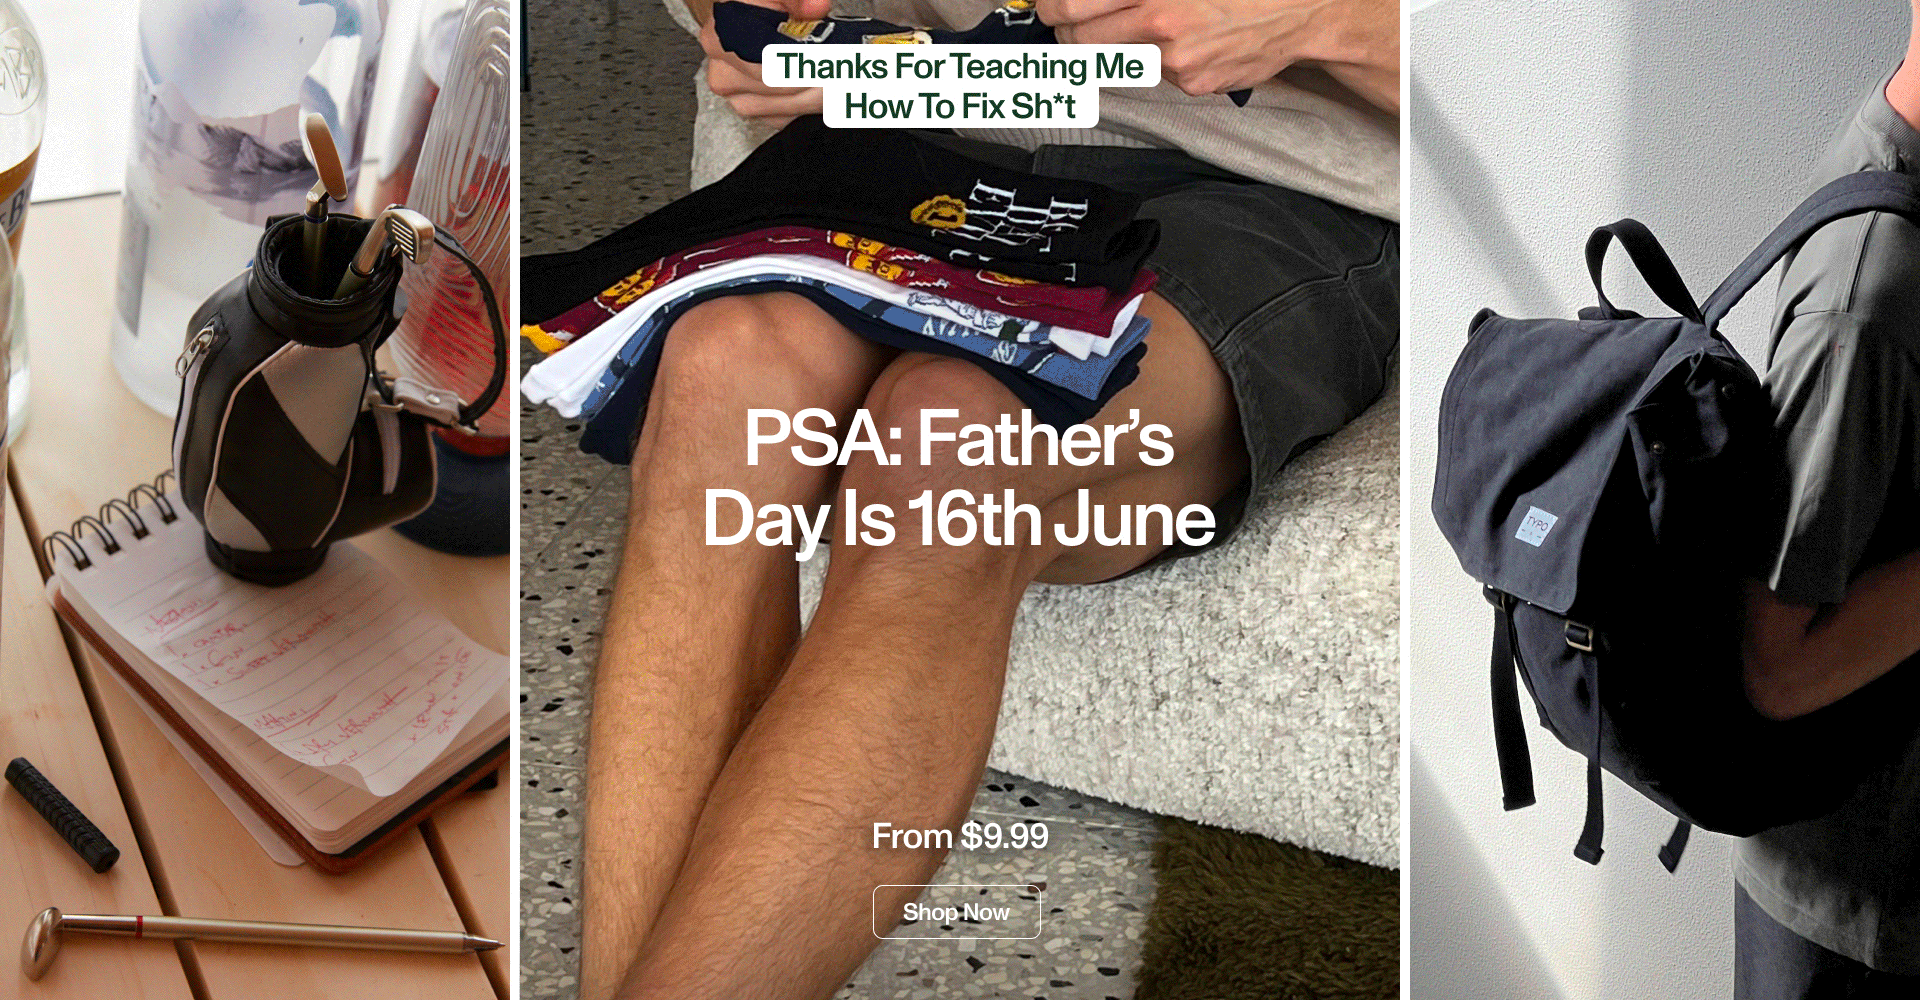 Thanks for teaching me how to fix shit. PSA: Father's Day is 16th June. From $9.99. Shop Now.